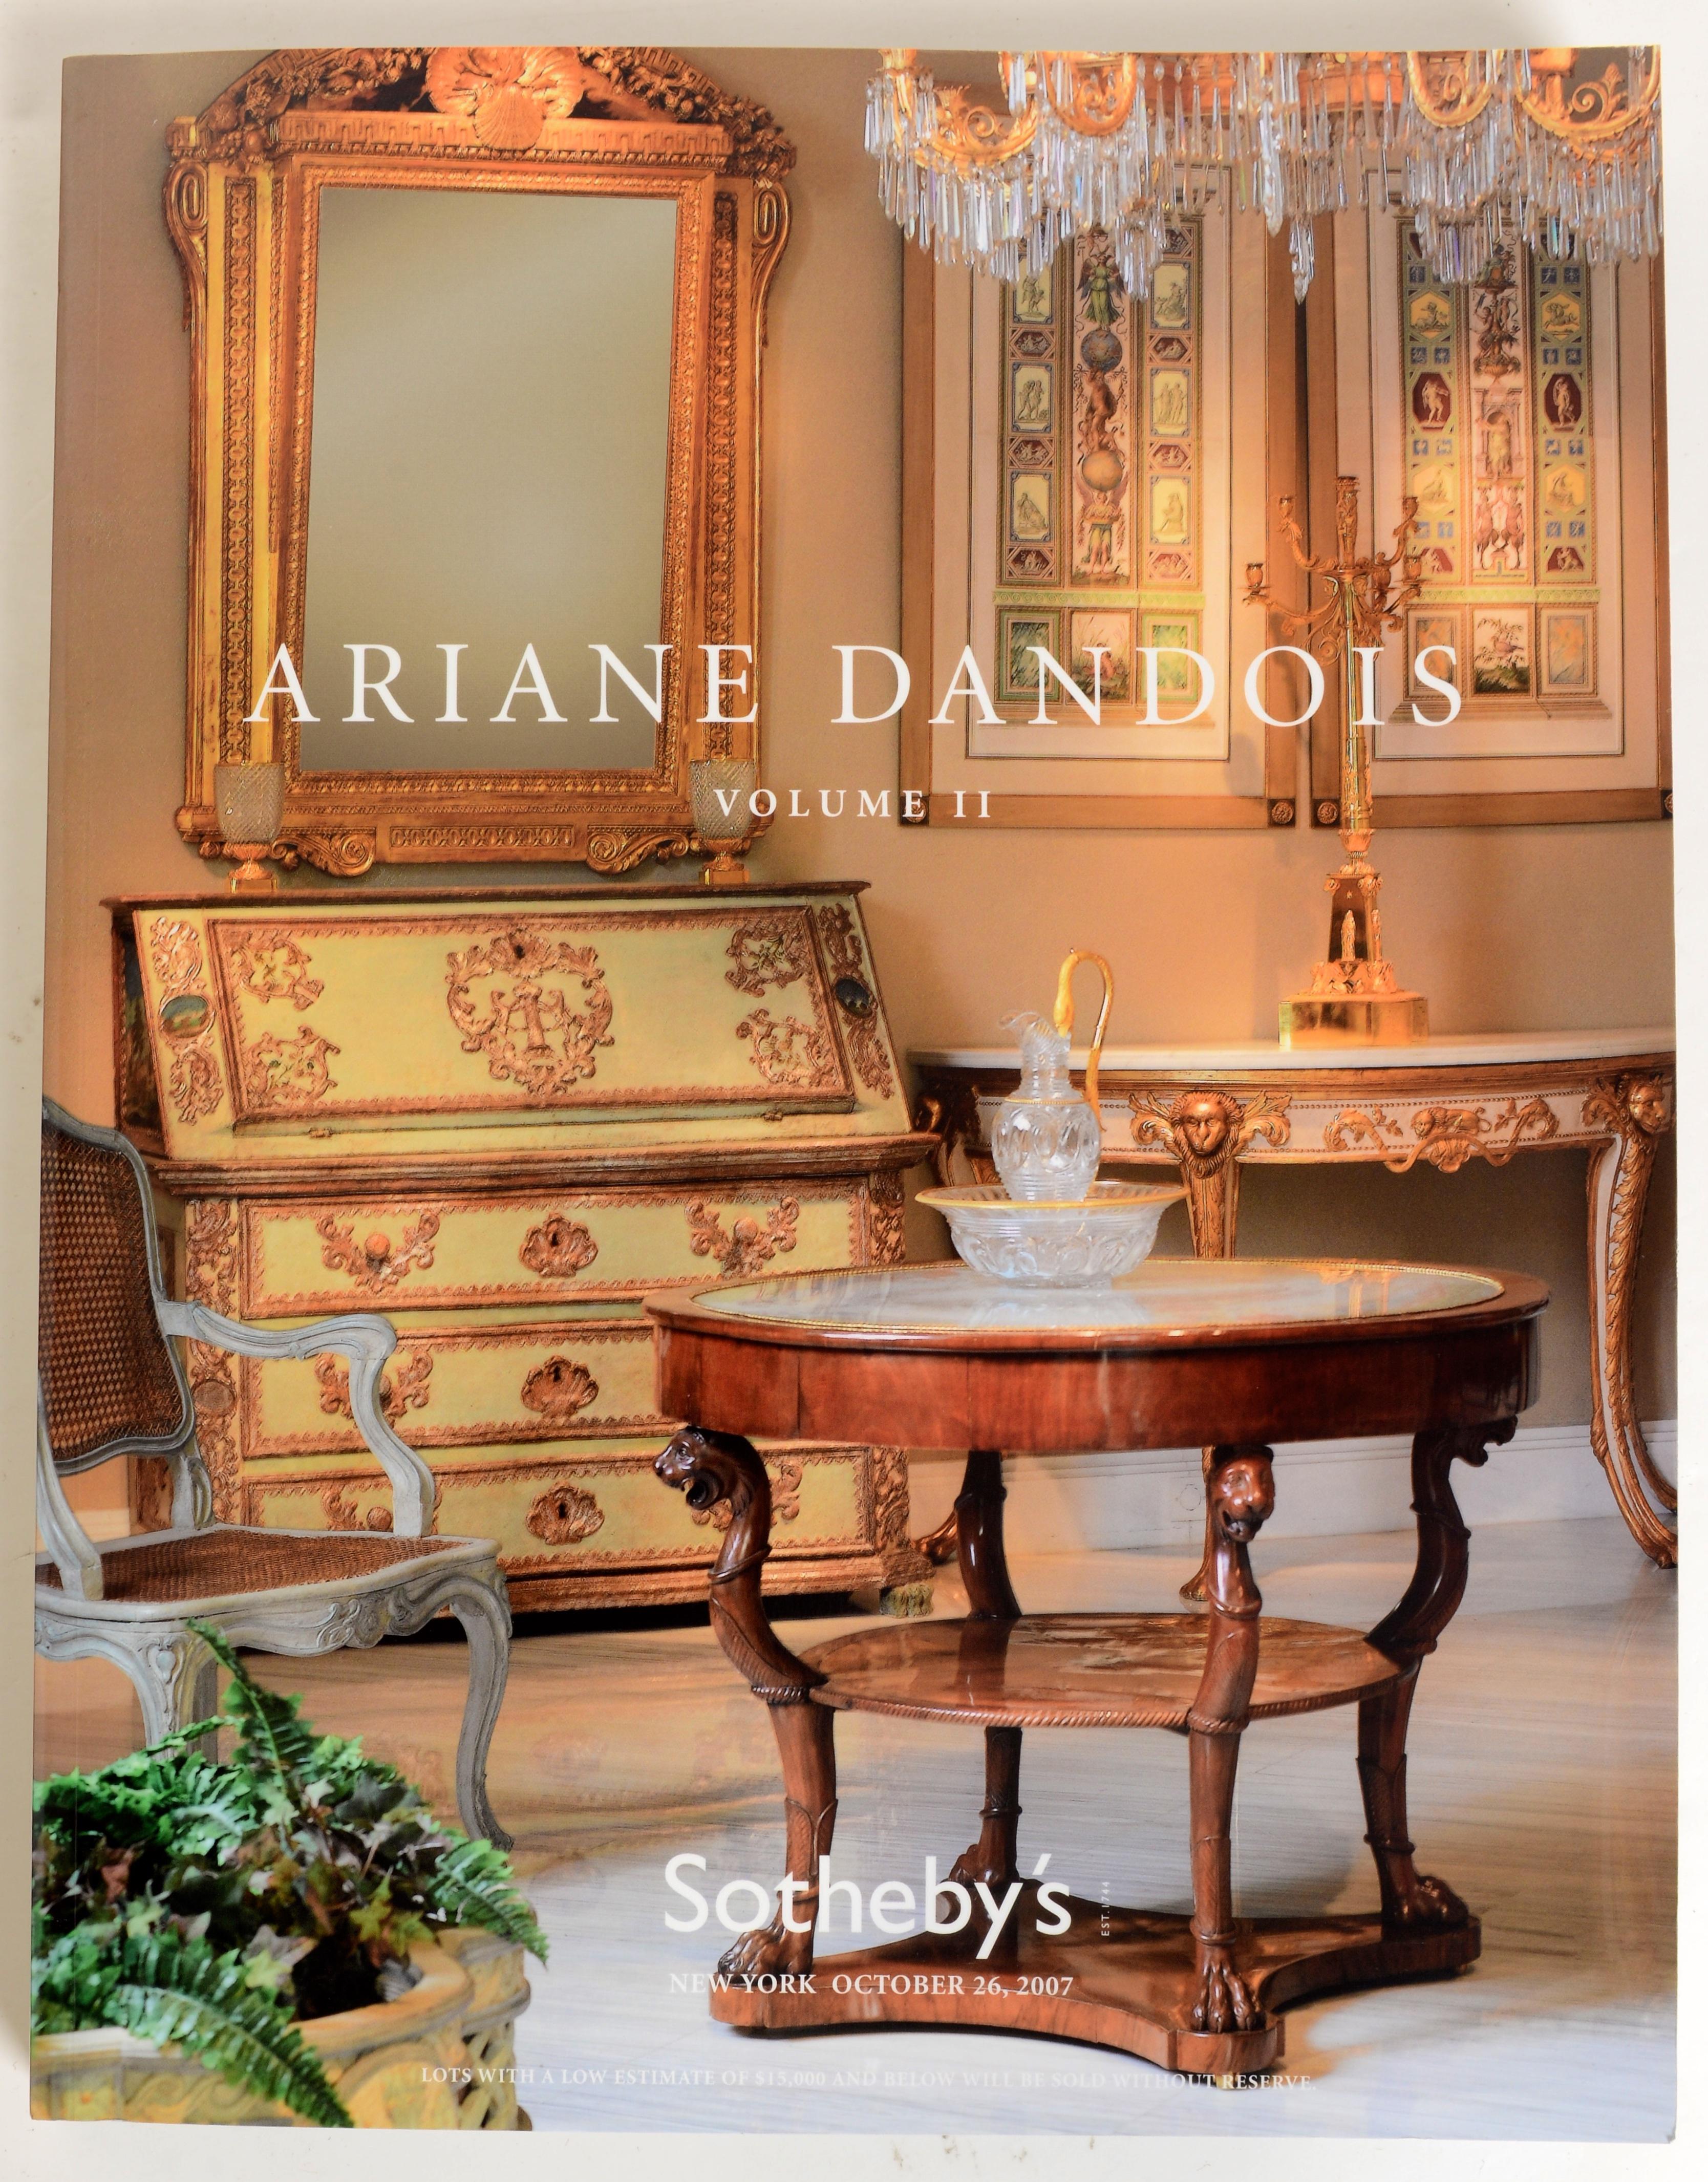 Sotheby's Ariane Dandois, October 2007, Volumes I and II, 1st Ed For Sale 3